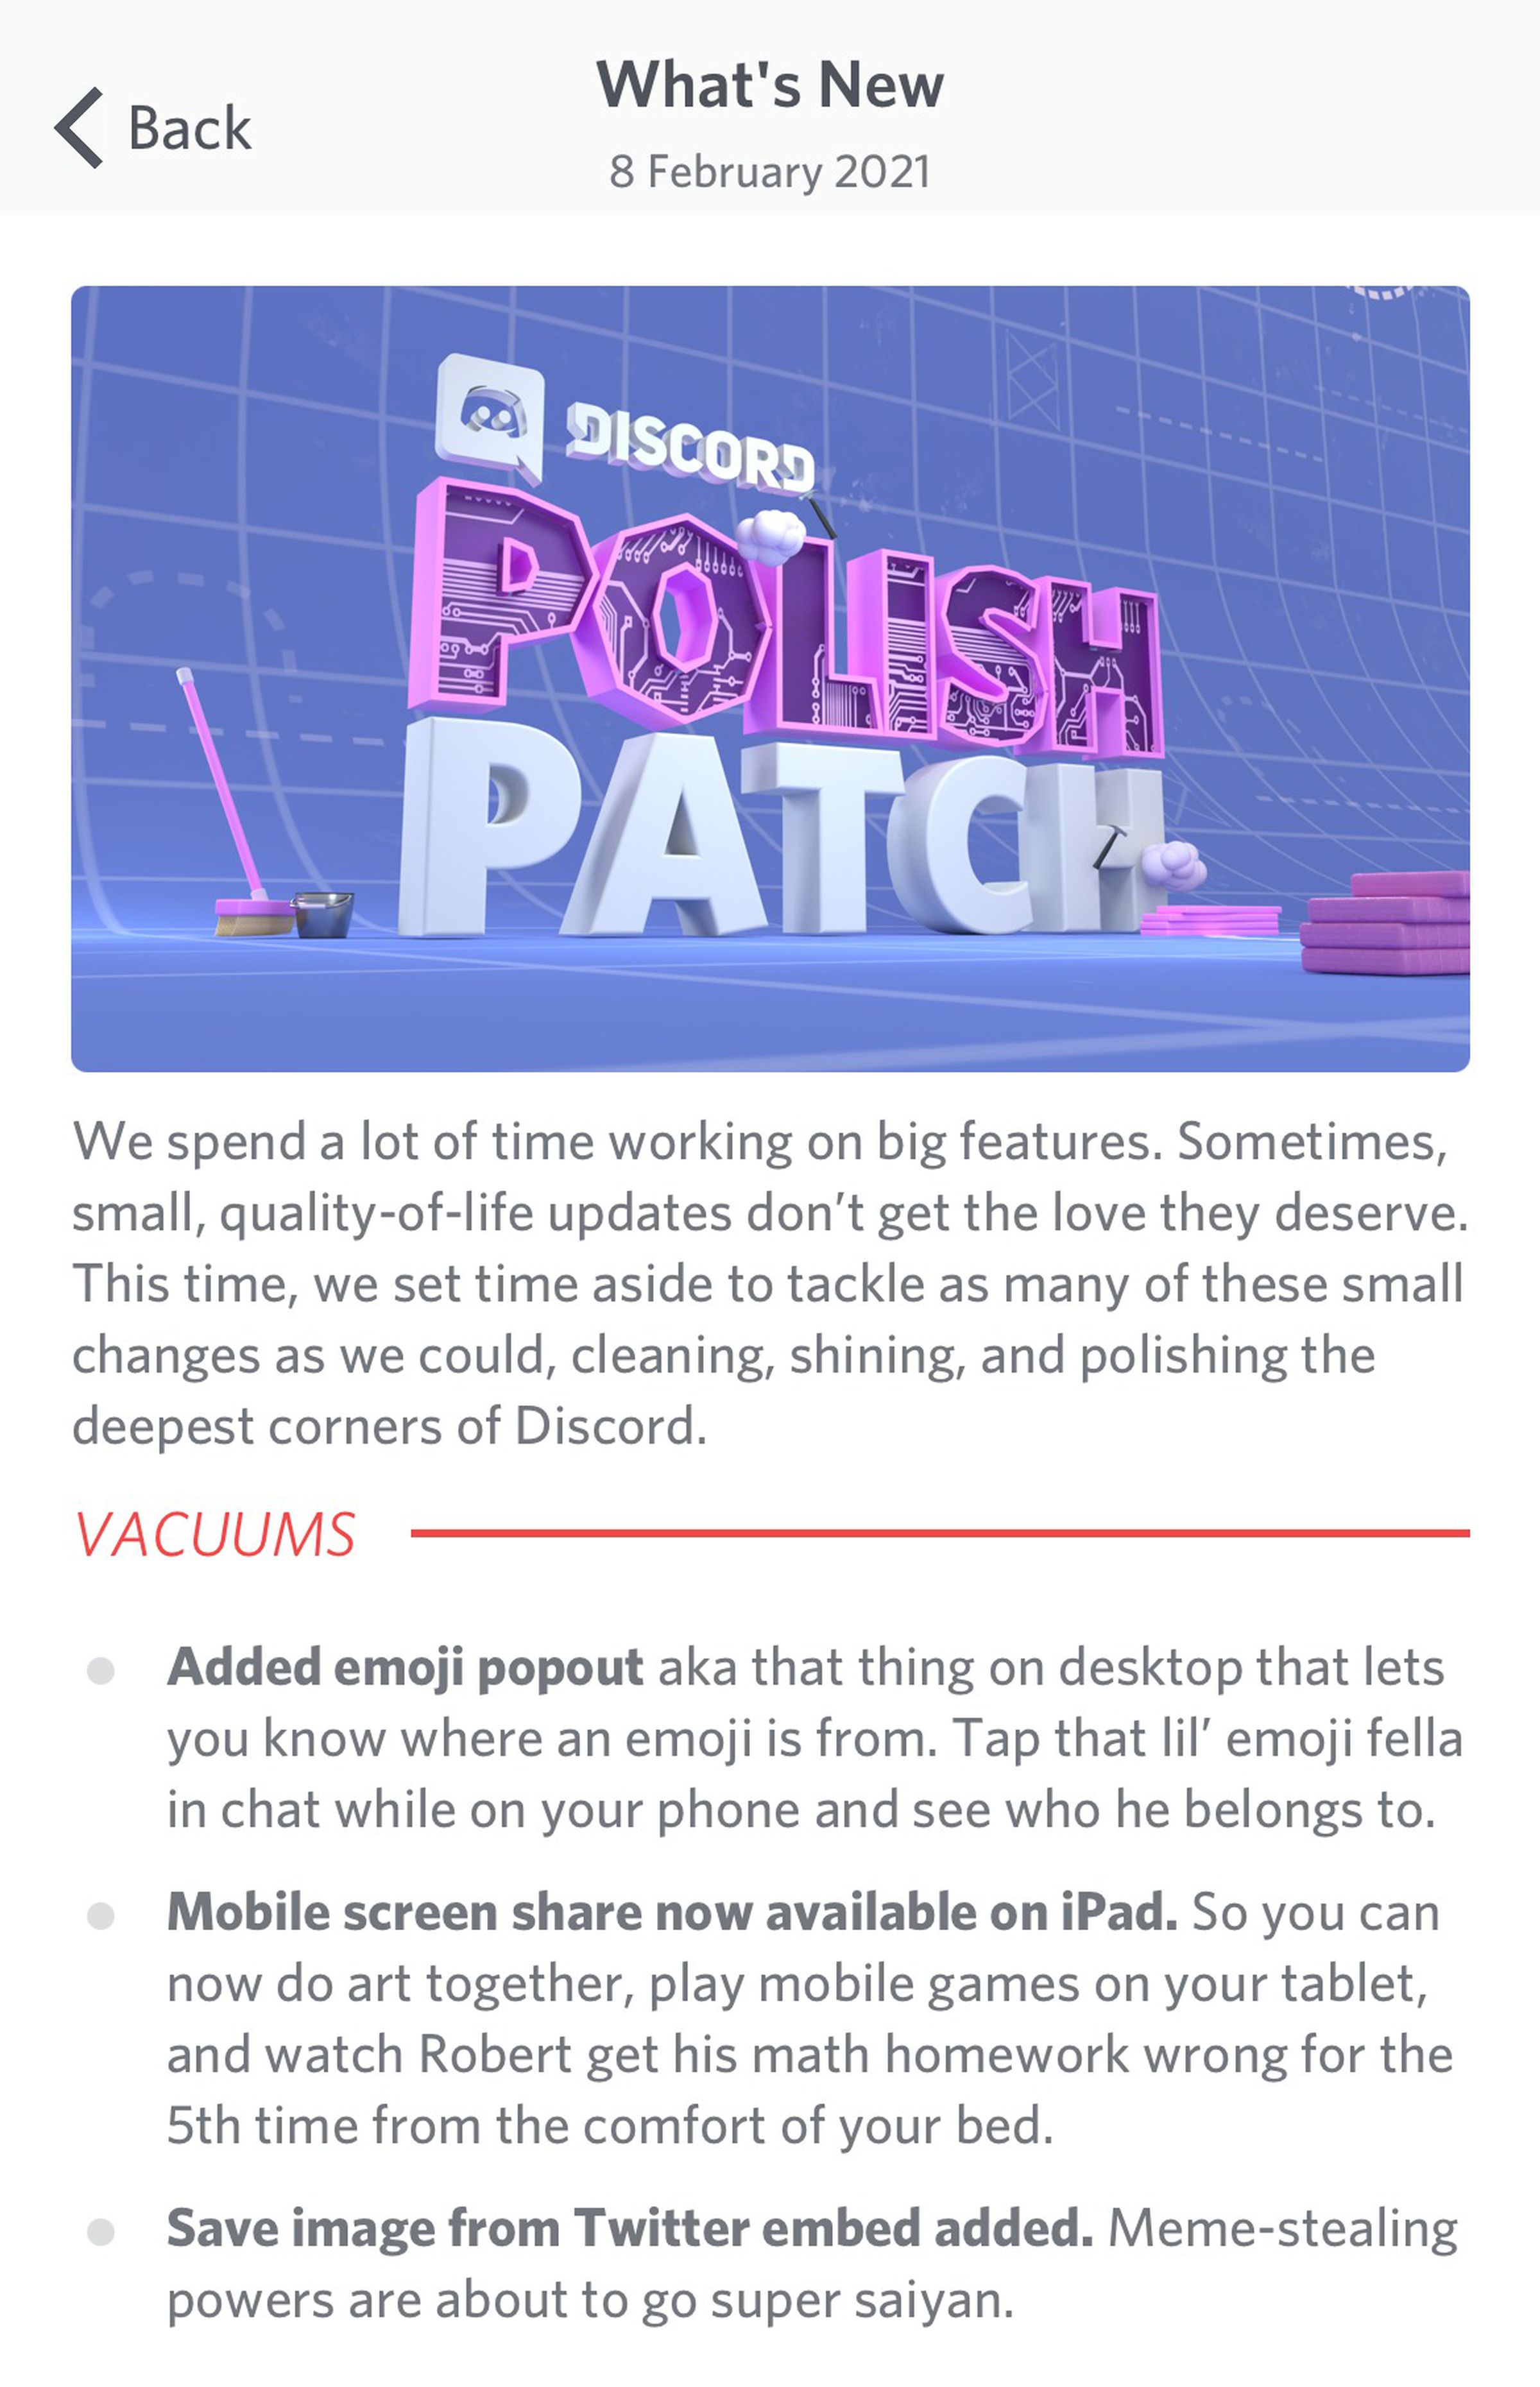 The changelog shown in Discord’s latest iOS version.